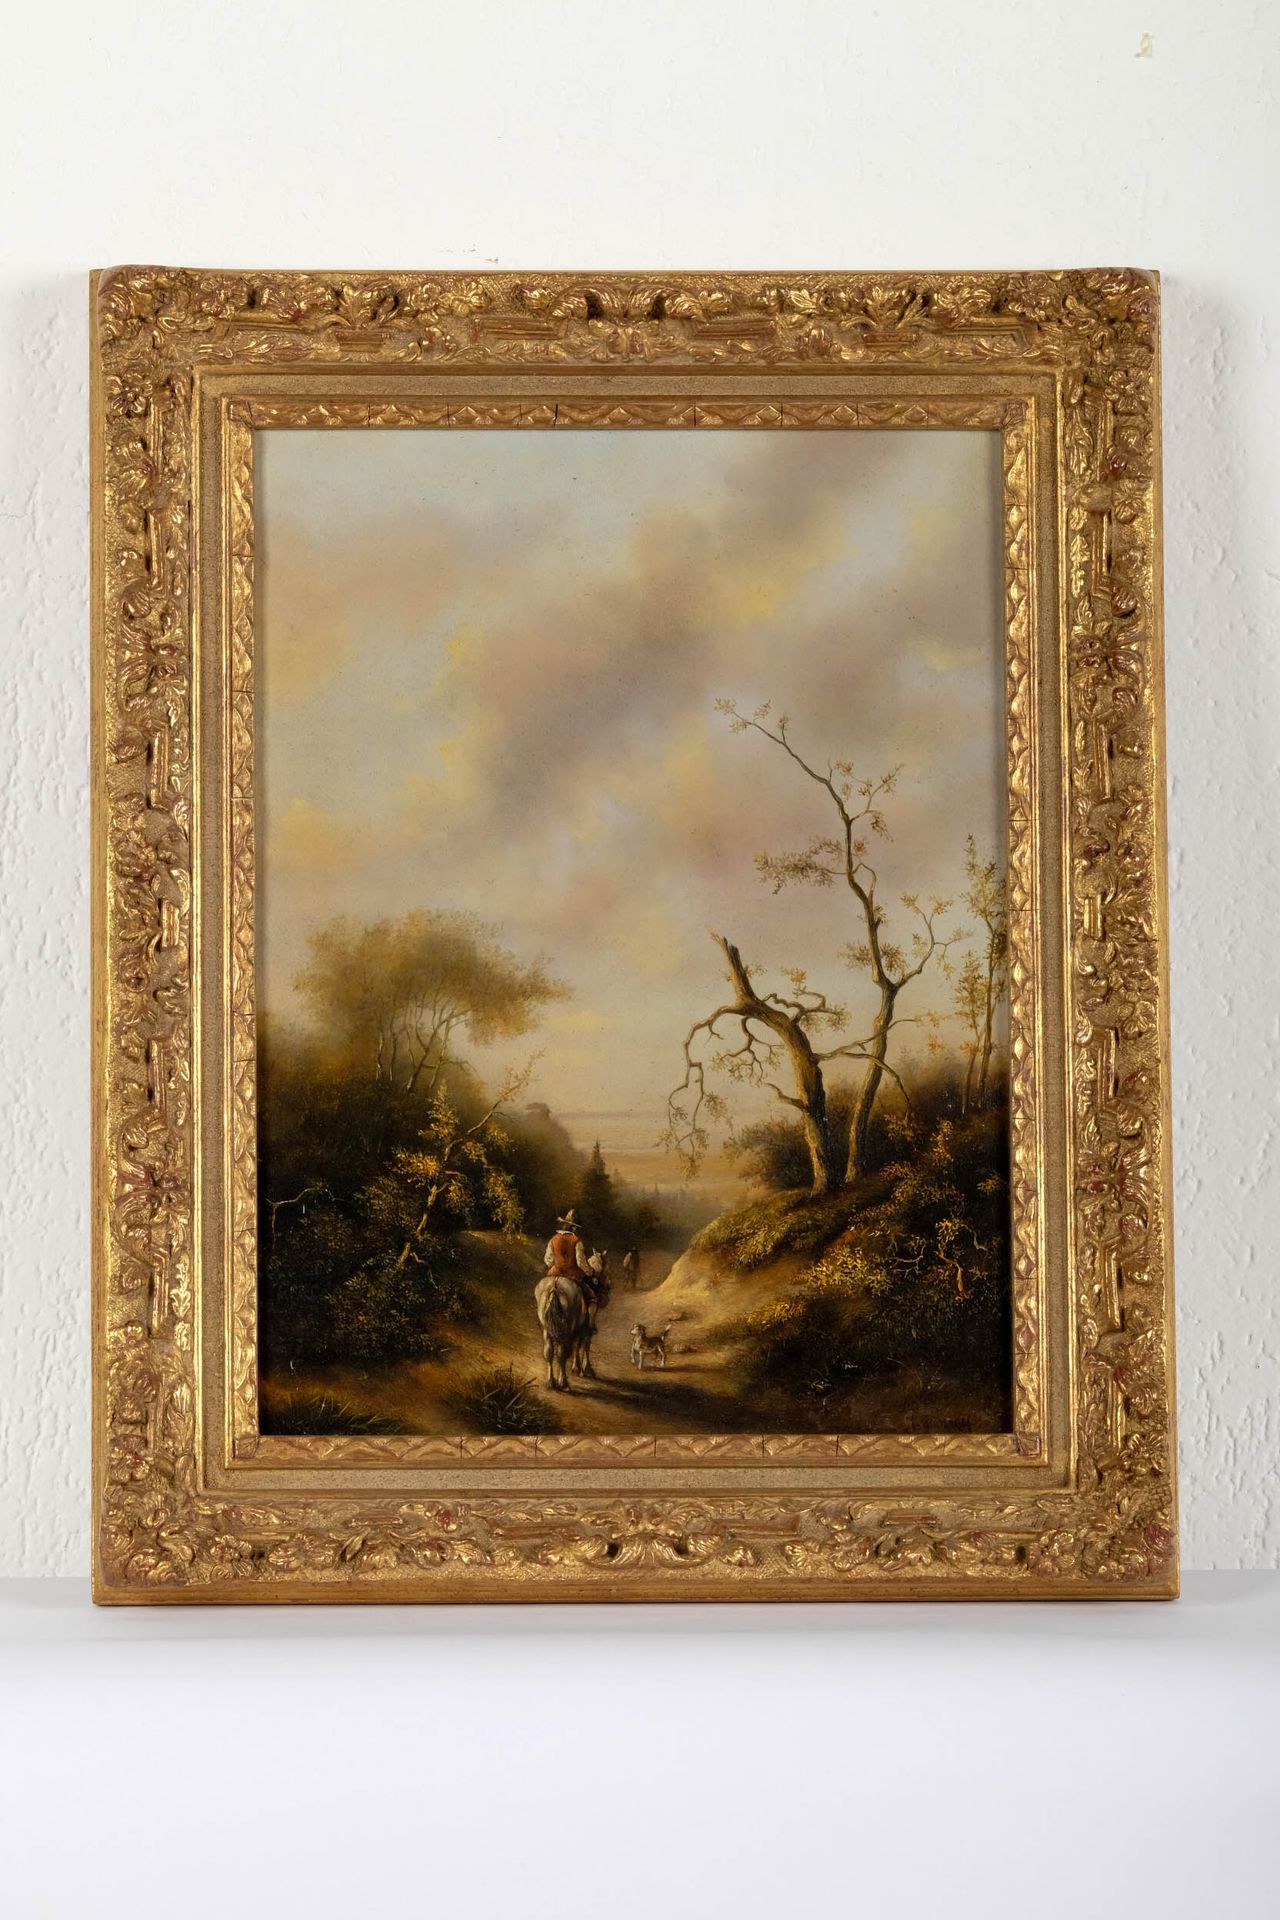 Joseph Quinaux (1822-1895) 
Landscape, framed, signed lower right, 40 X 30 cm.